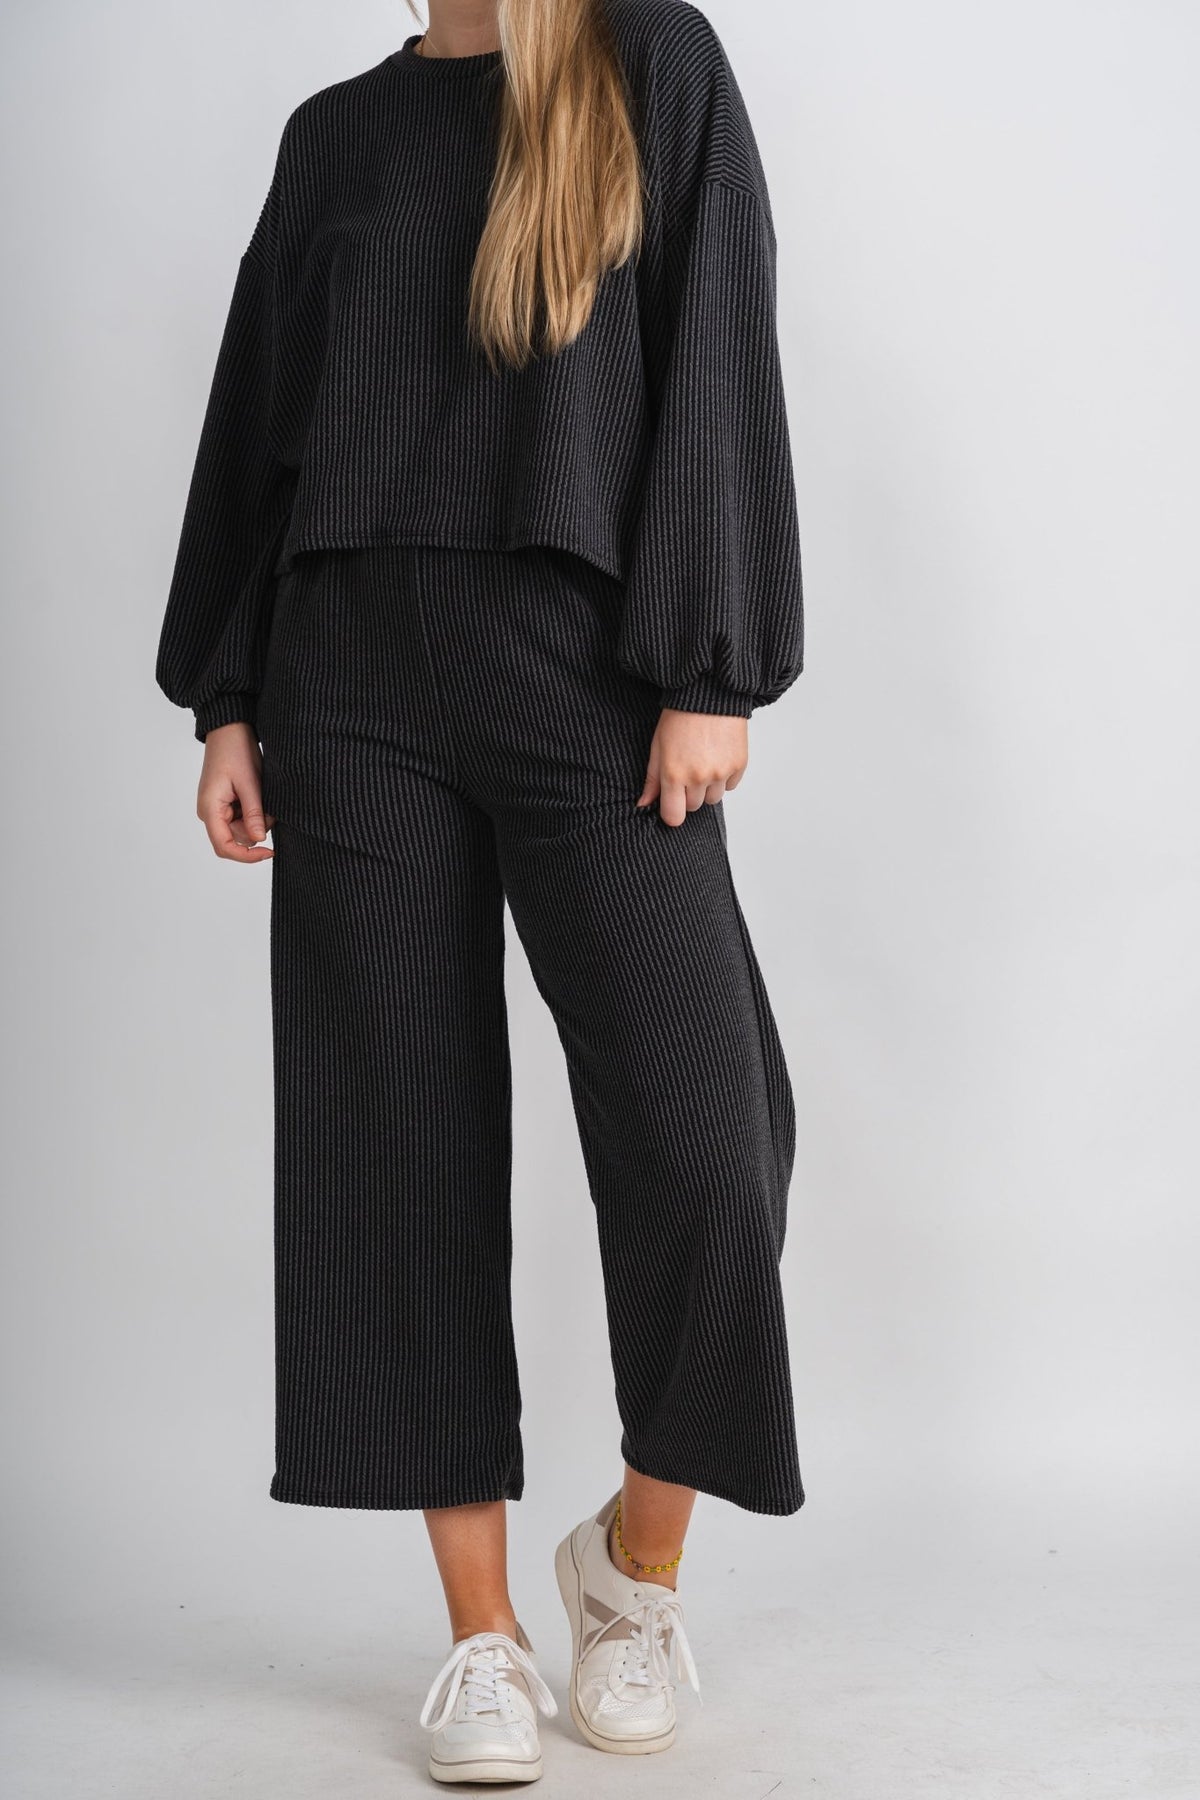 Manifest ribbed pants black - Trendy Pants - Cute Loungewear Collection at Lush Fashion Lounge Boutique in Oklahoma City